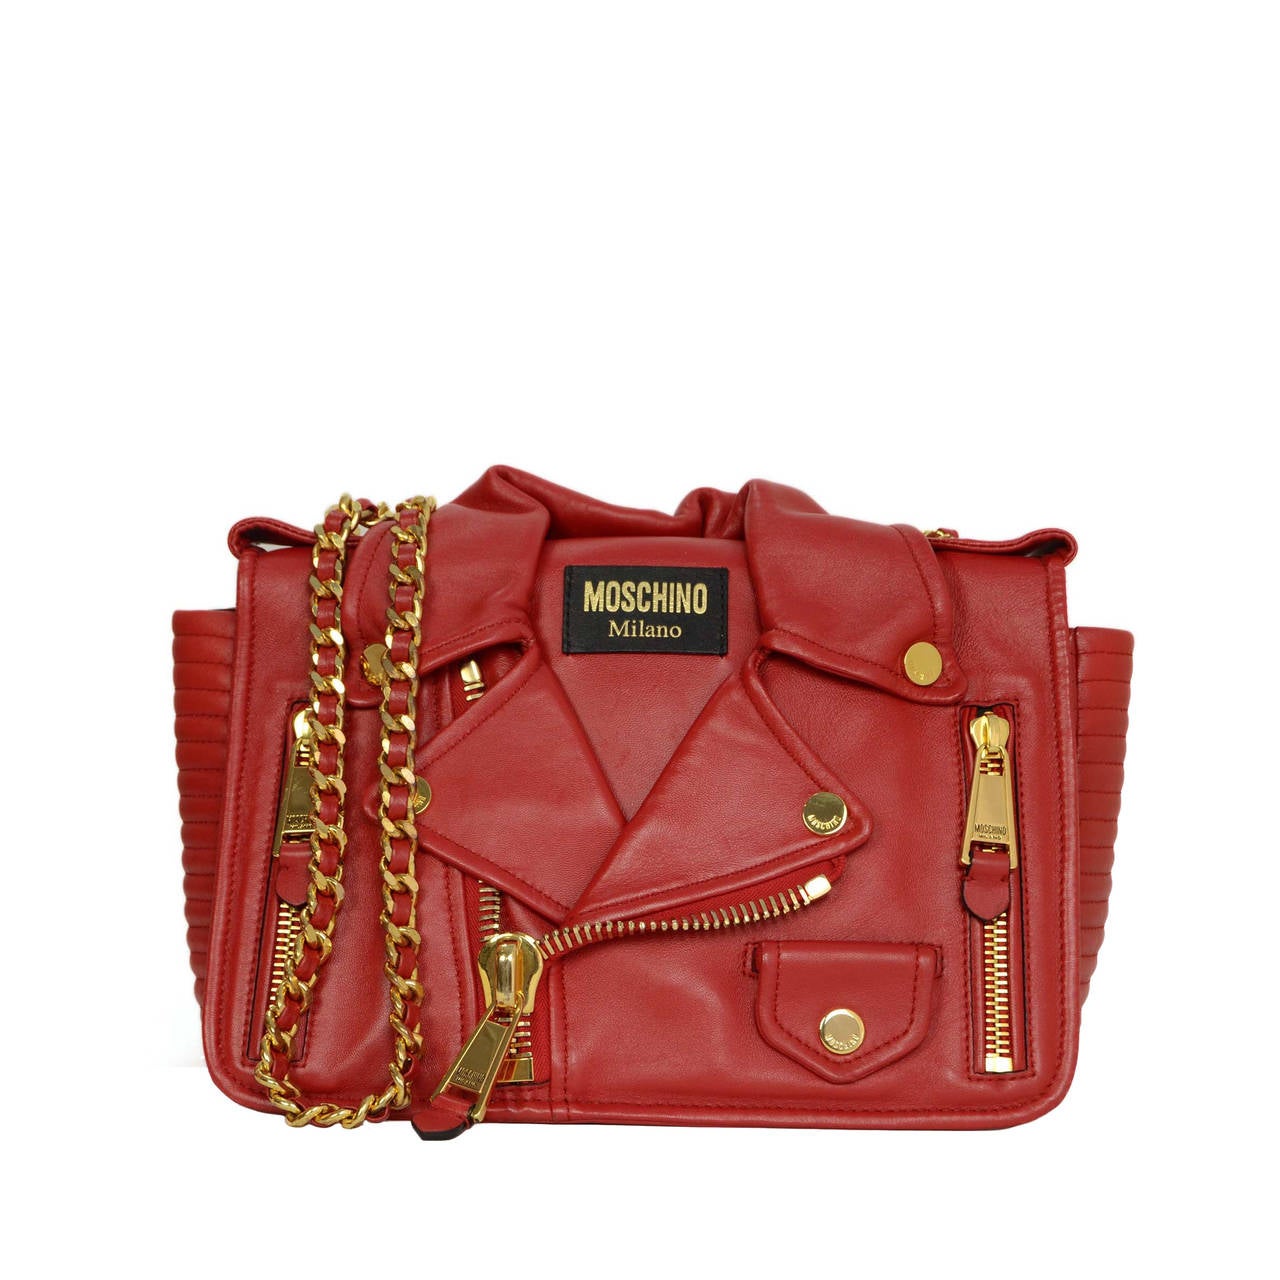 MOSCHINO Red Leather Motorcycle Jacket Bag GHW